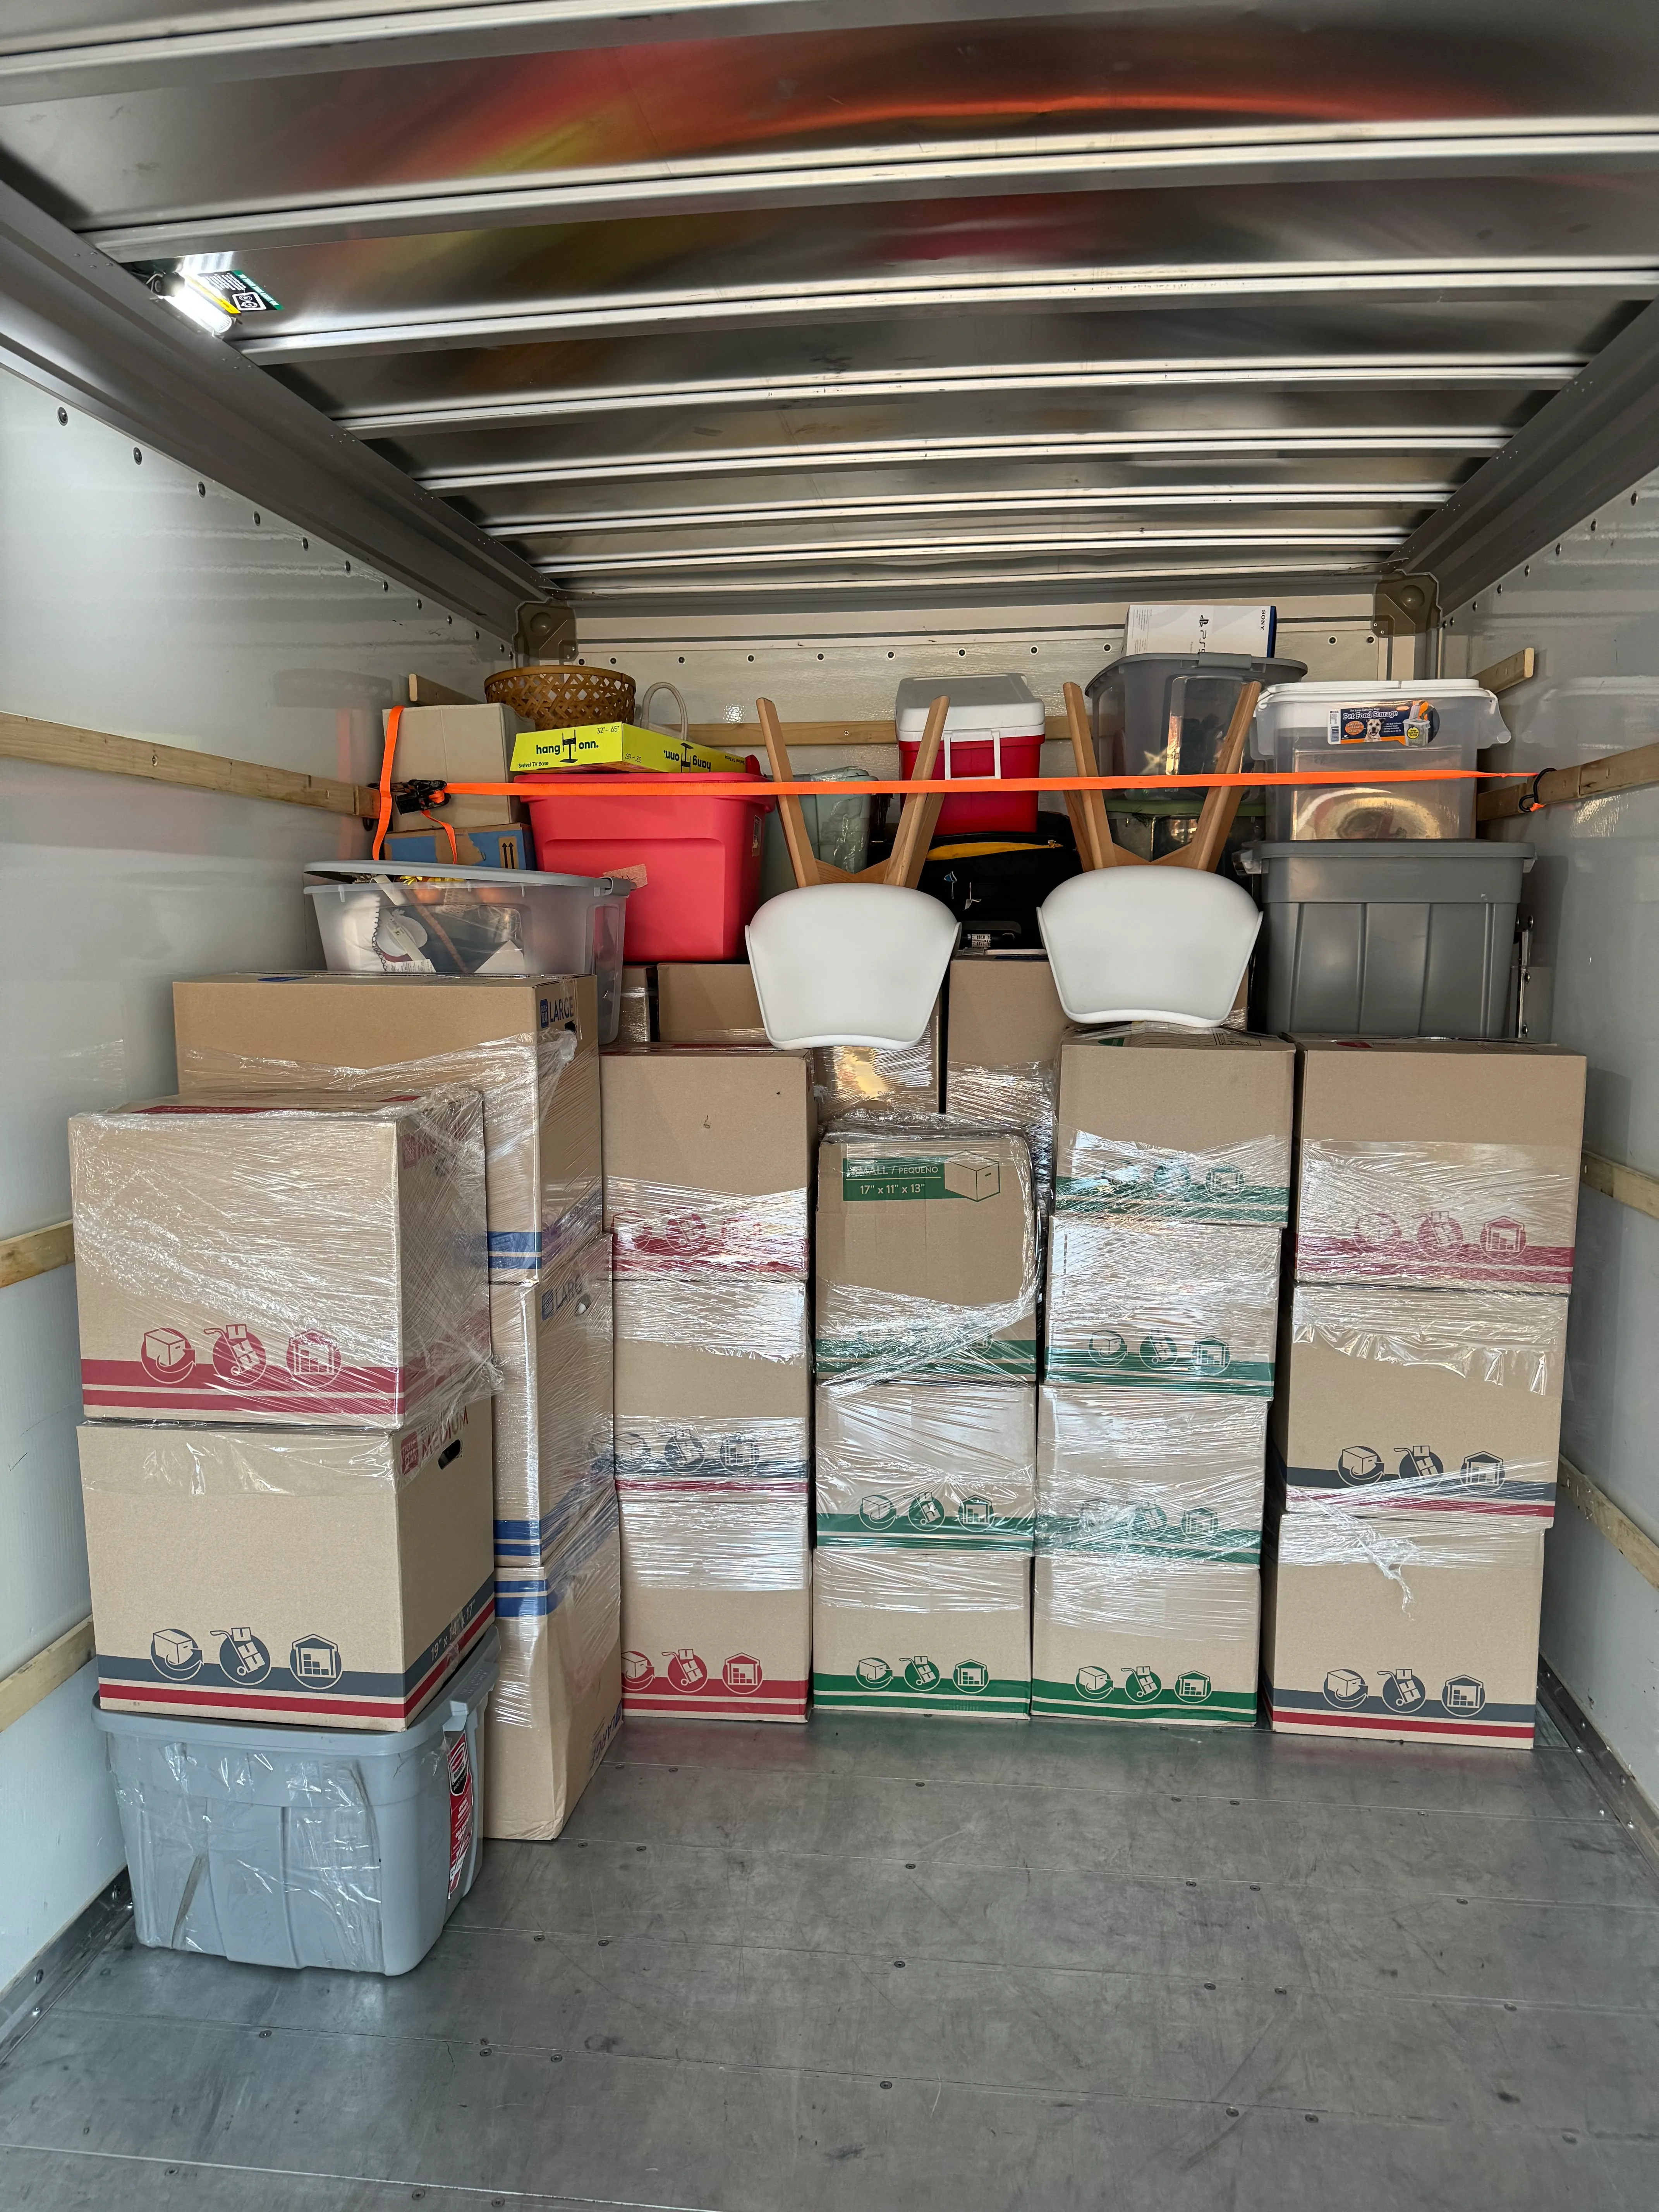 Packing Service for Erikson Movers  in Pea Ridge, Arkansas